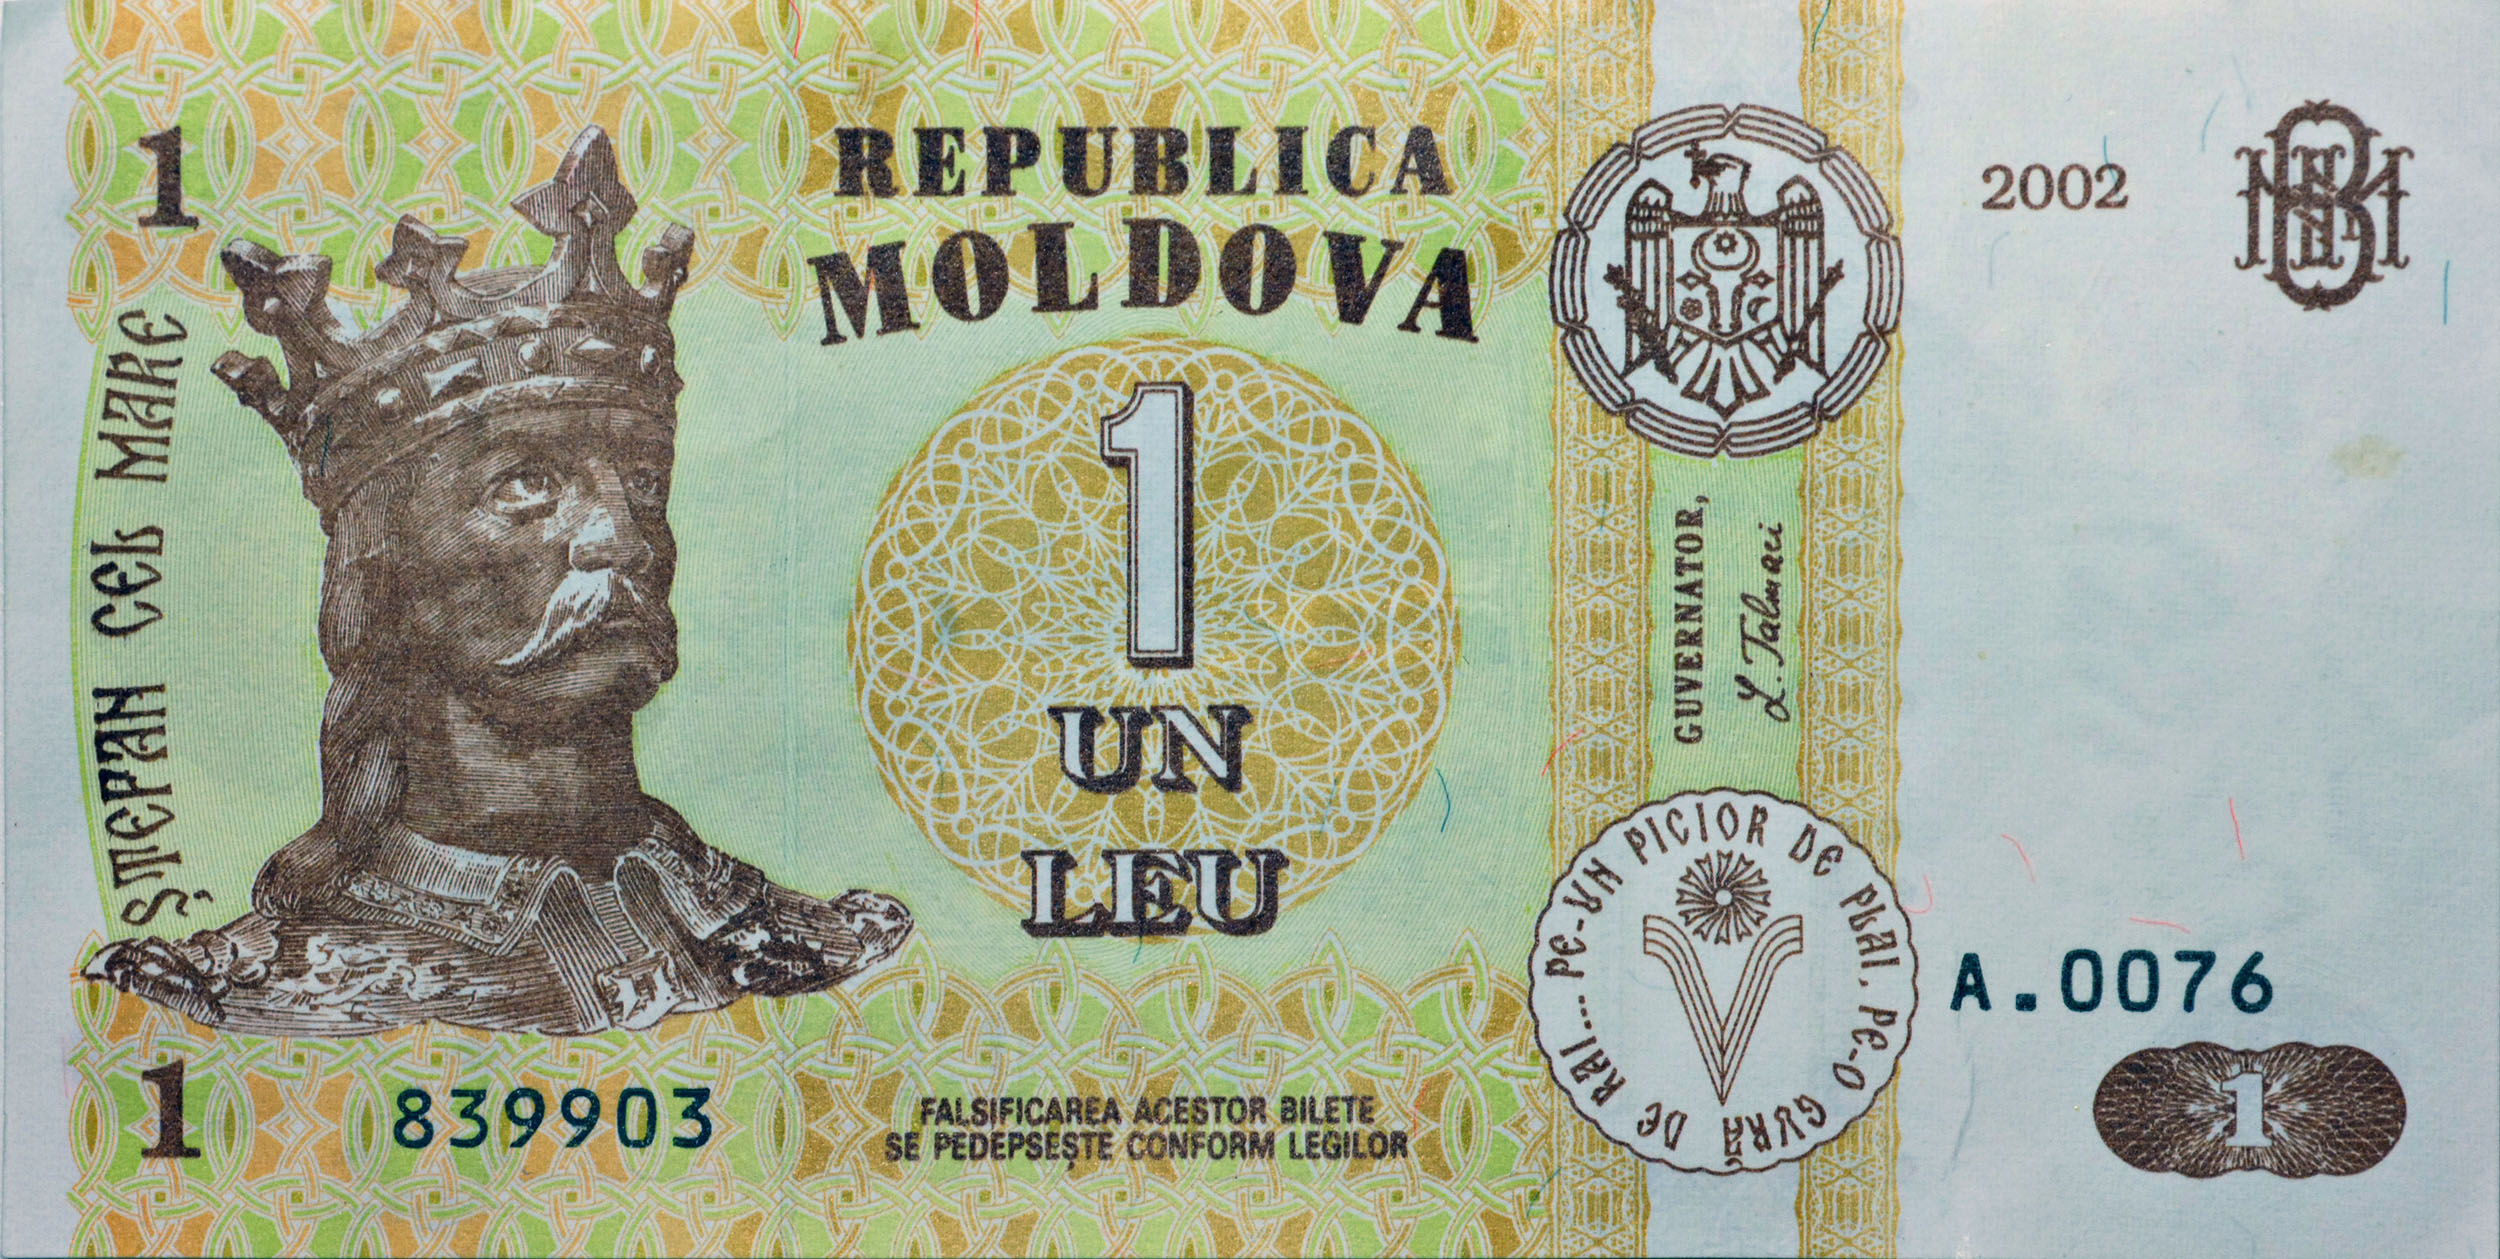 A note for one leu, the currency of Moldova.
